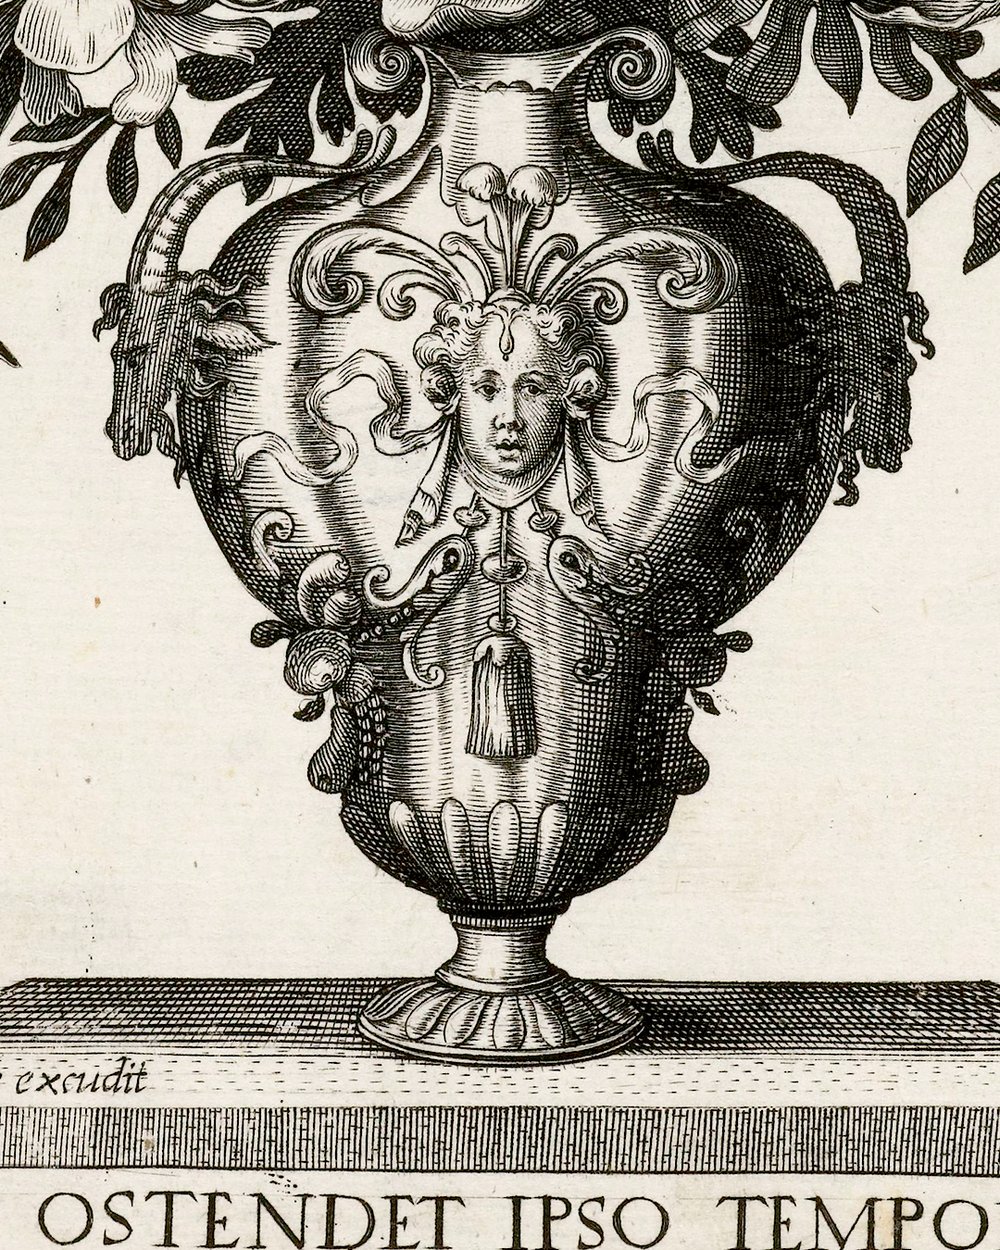 ''Grotesque vase with two ears in the shape of heads of goats'' (1500 - 1600)